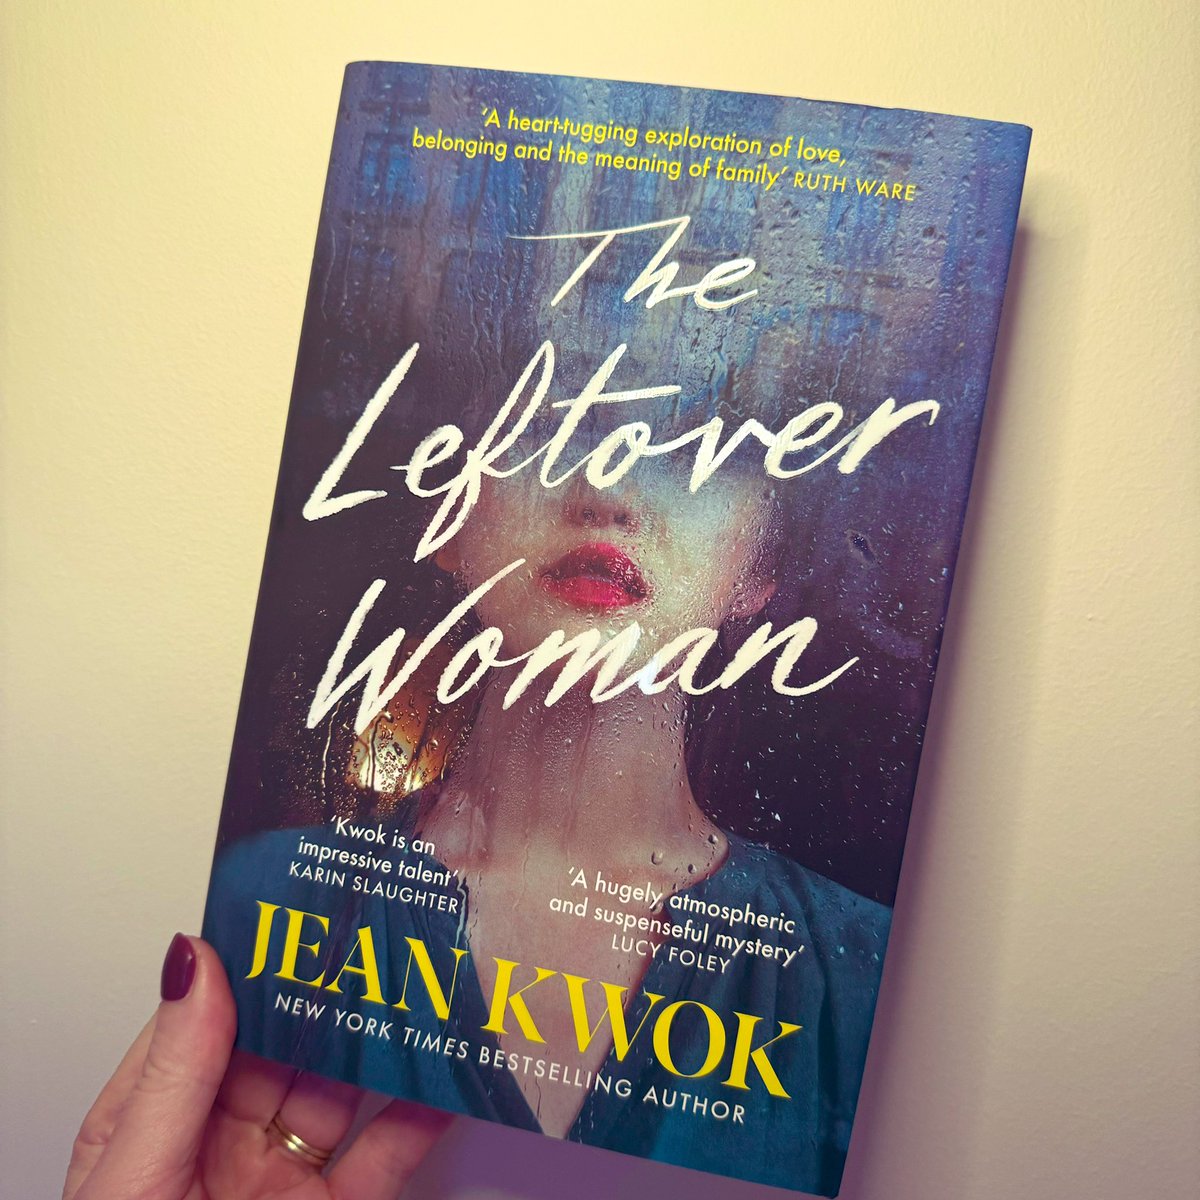 Happy Publication Day to #TheLeftoverWoman by @JeanKwok  out today from @ViperBooks. Looking forward to sharing my review next week as part of the @RandomTTours Blog Tour